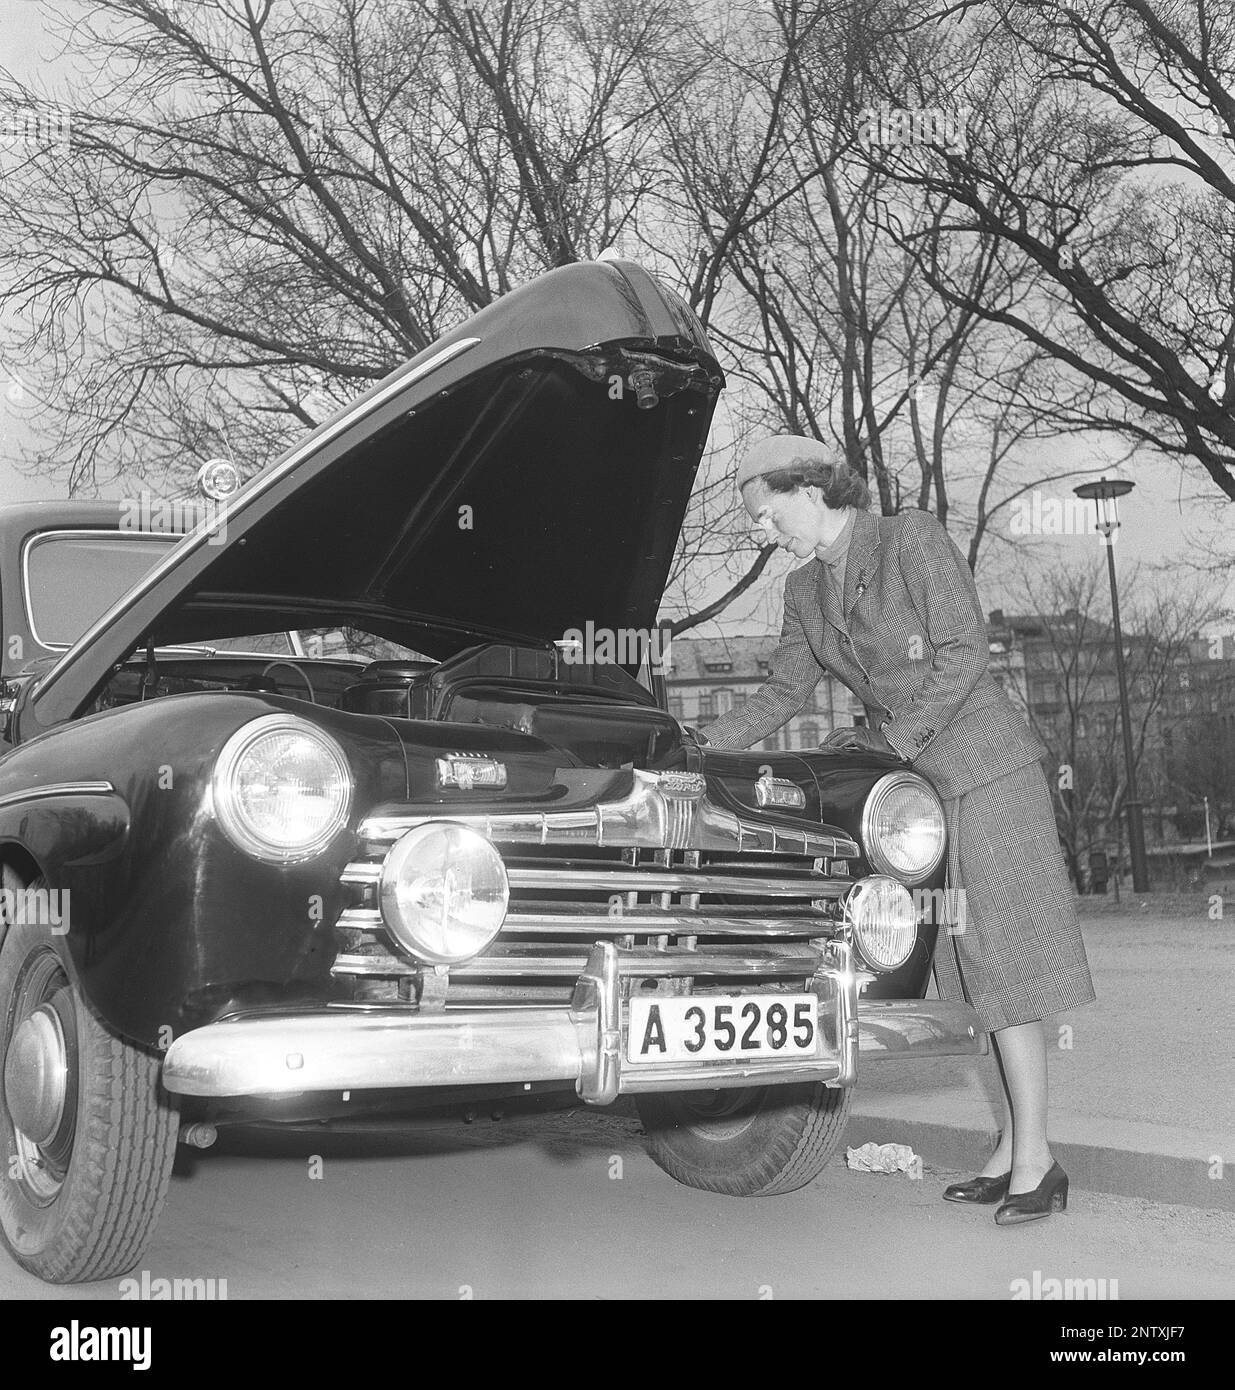 In the 1940s. A nicely dressed woman in a matching jacket and skirt has opened the hood of her Ford car and looks at something. Judging from her clothes she's not dressed to deal with any mechanical problem, nor any tools or liquids visible, only a picture taken to illustrate a do-it-yourself woman at this time.  Sweden 1949Kristoffersson ref AY83-10 Stock Photo